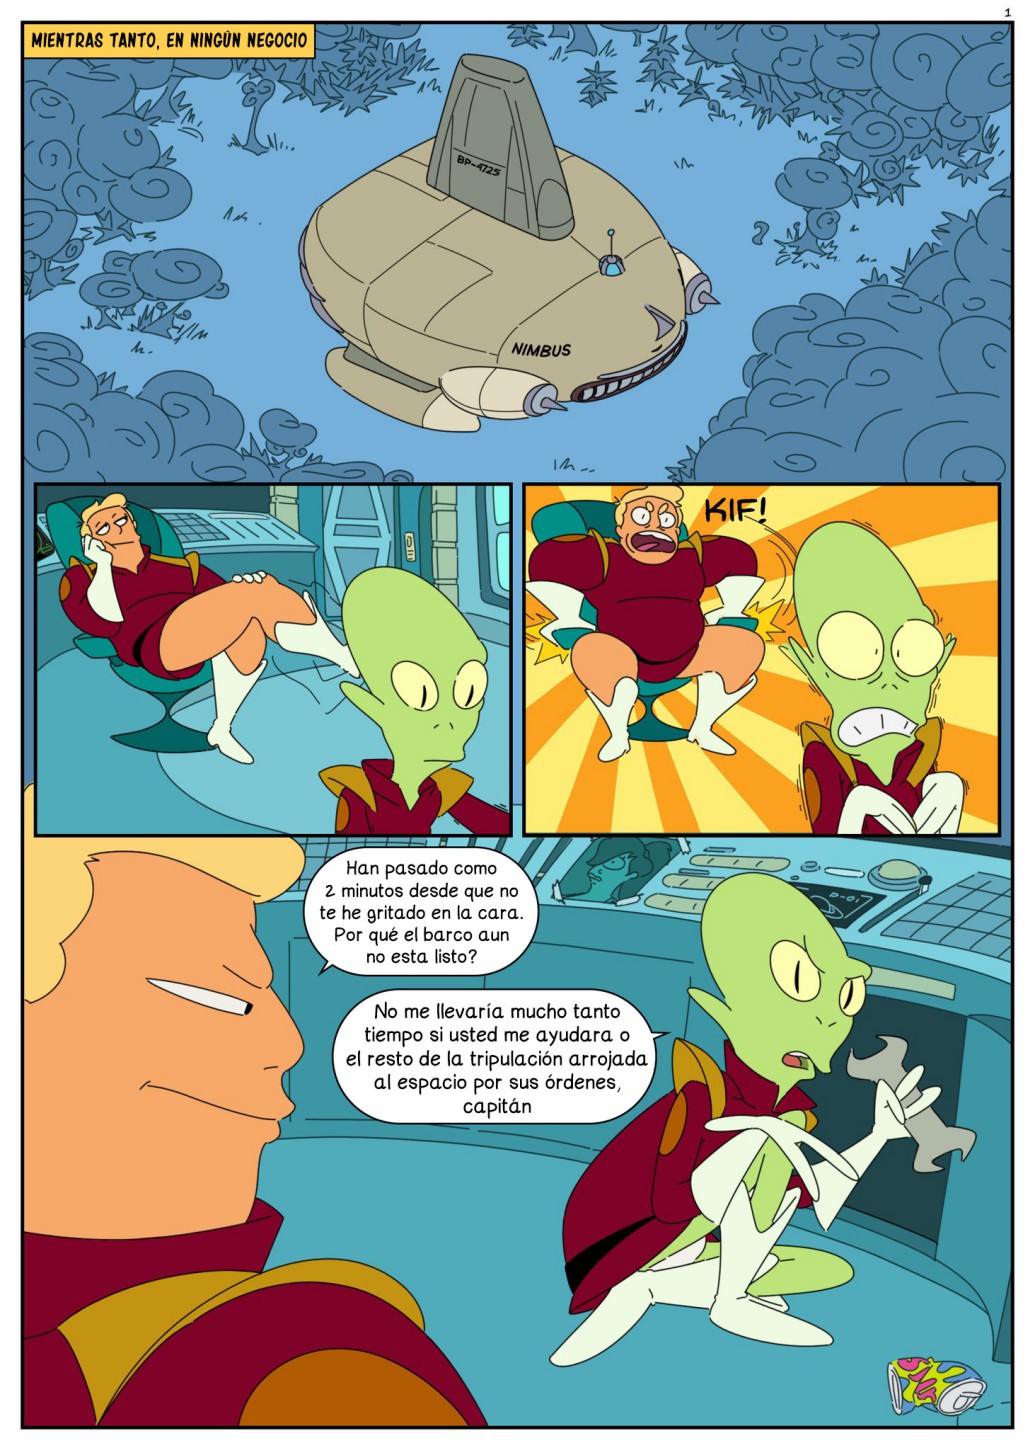 Zapp Brannigan and the Misterious Omicronian image number 1